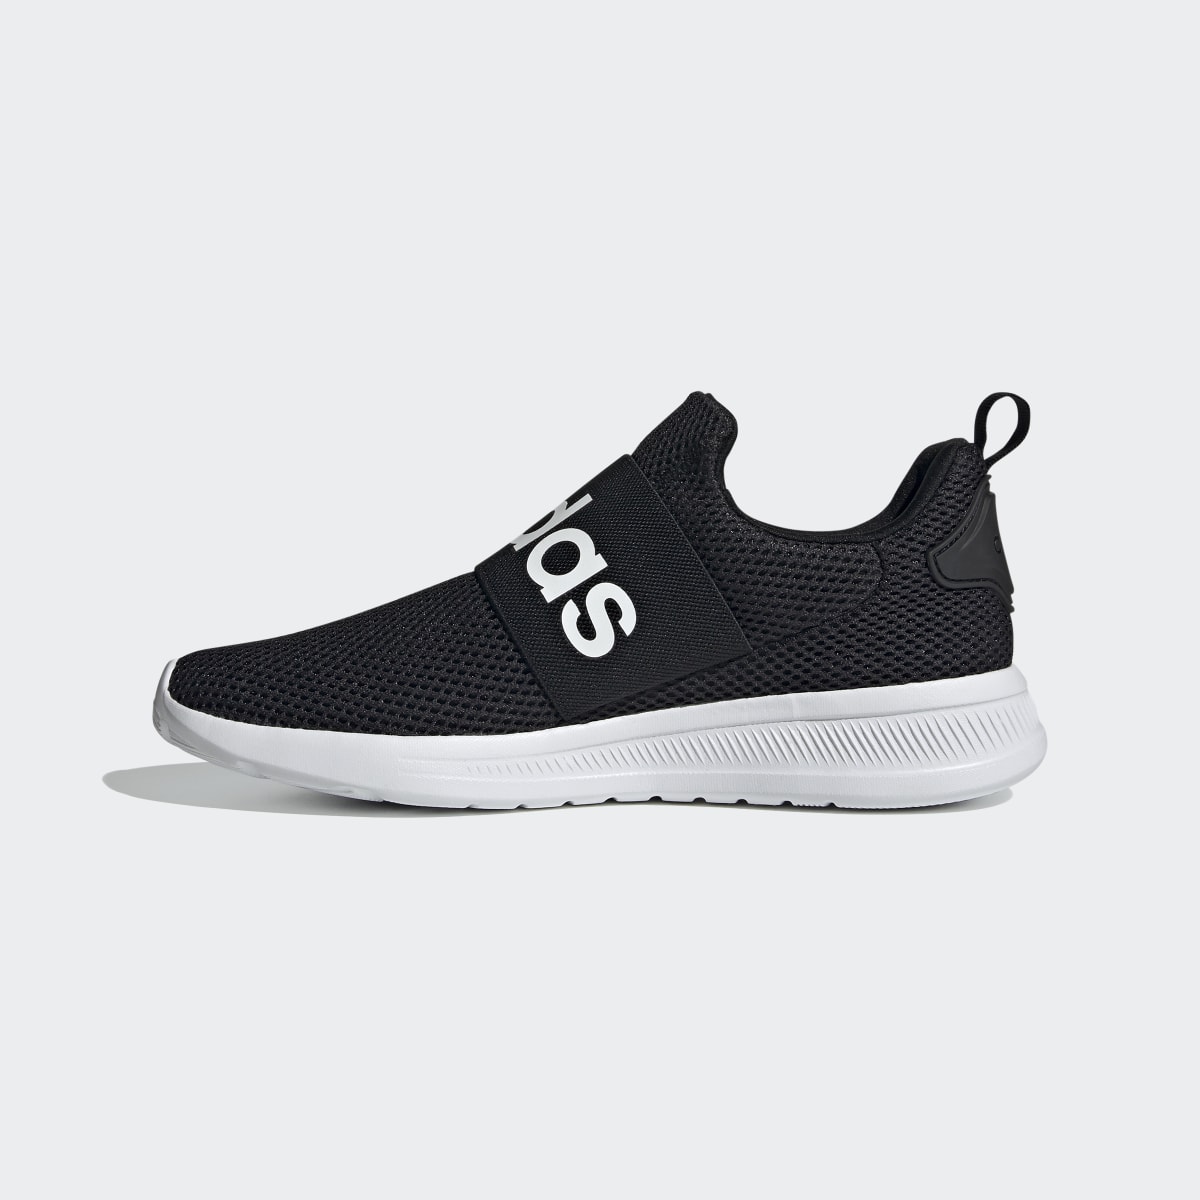 Adidas Lite Racer Adapt 4.0 Shoes. 7